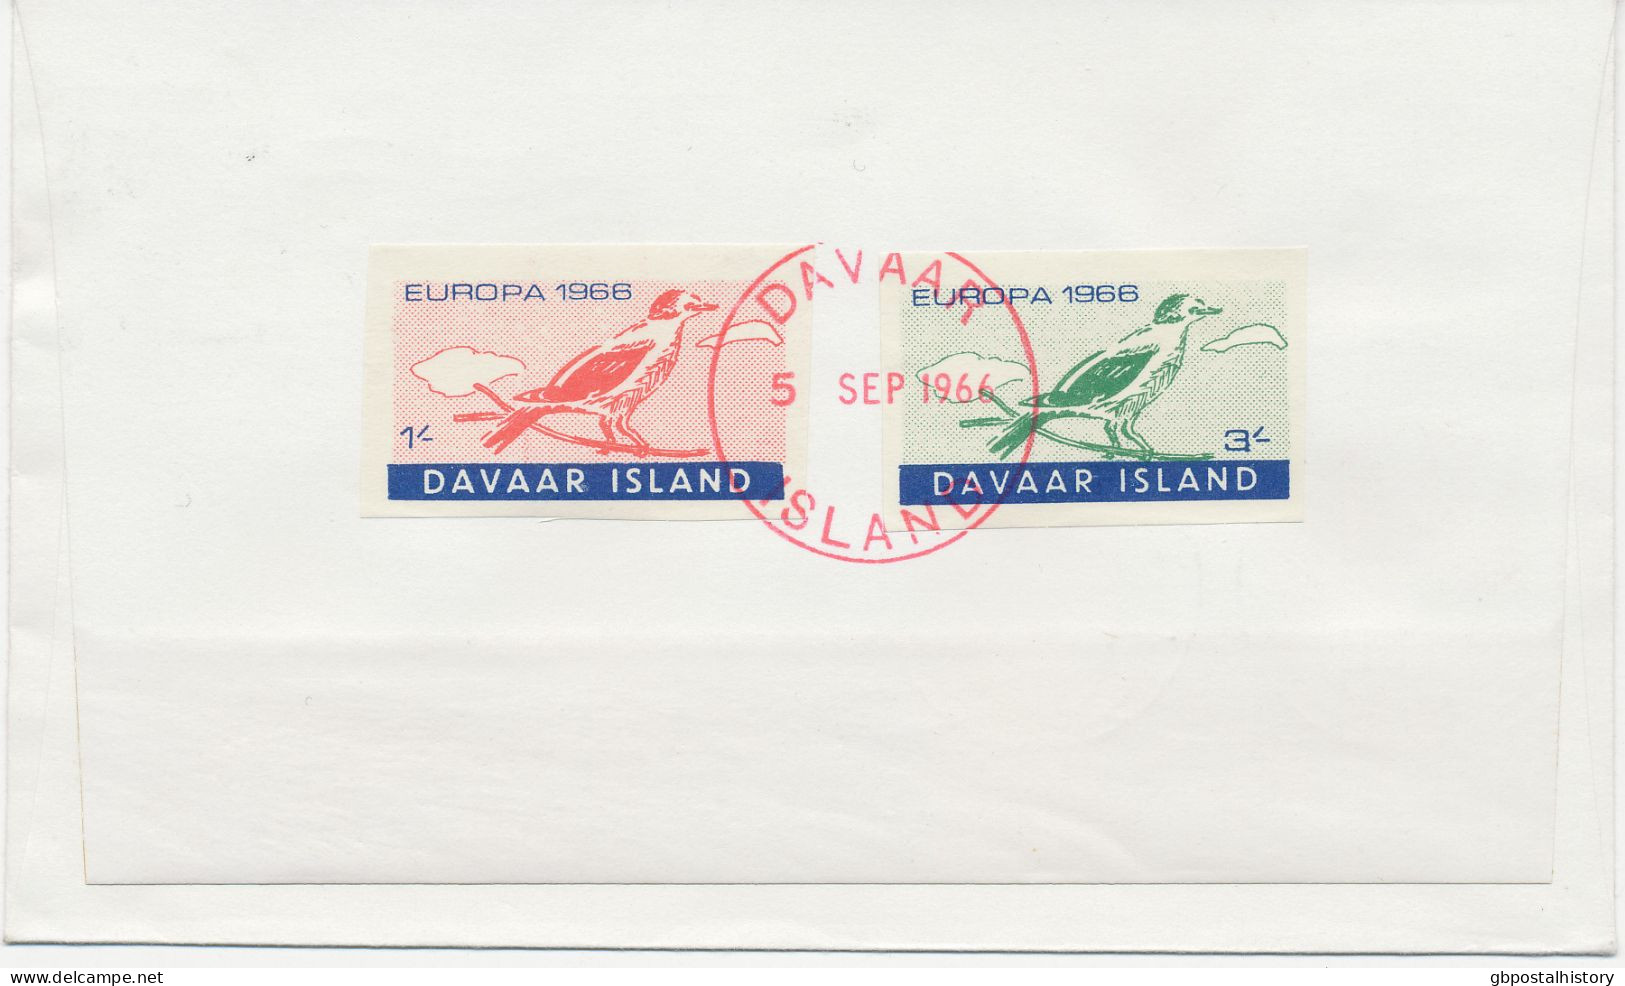 GB Davaar Island COLLECTION 1964/6 7 different FDC's all rare EUROPE-CEPT issues extremely rare as well as two DIANA FDC